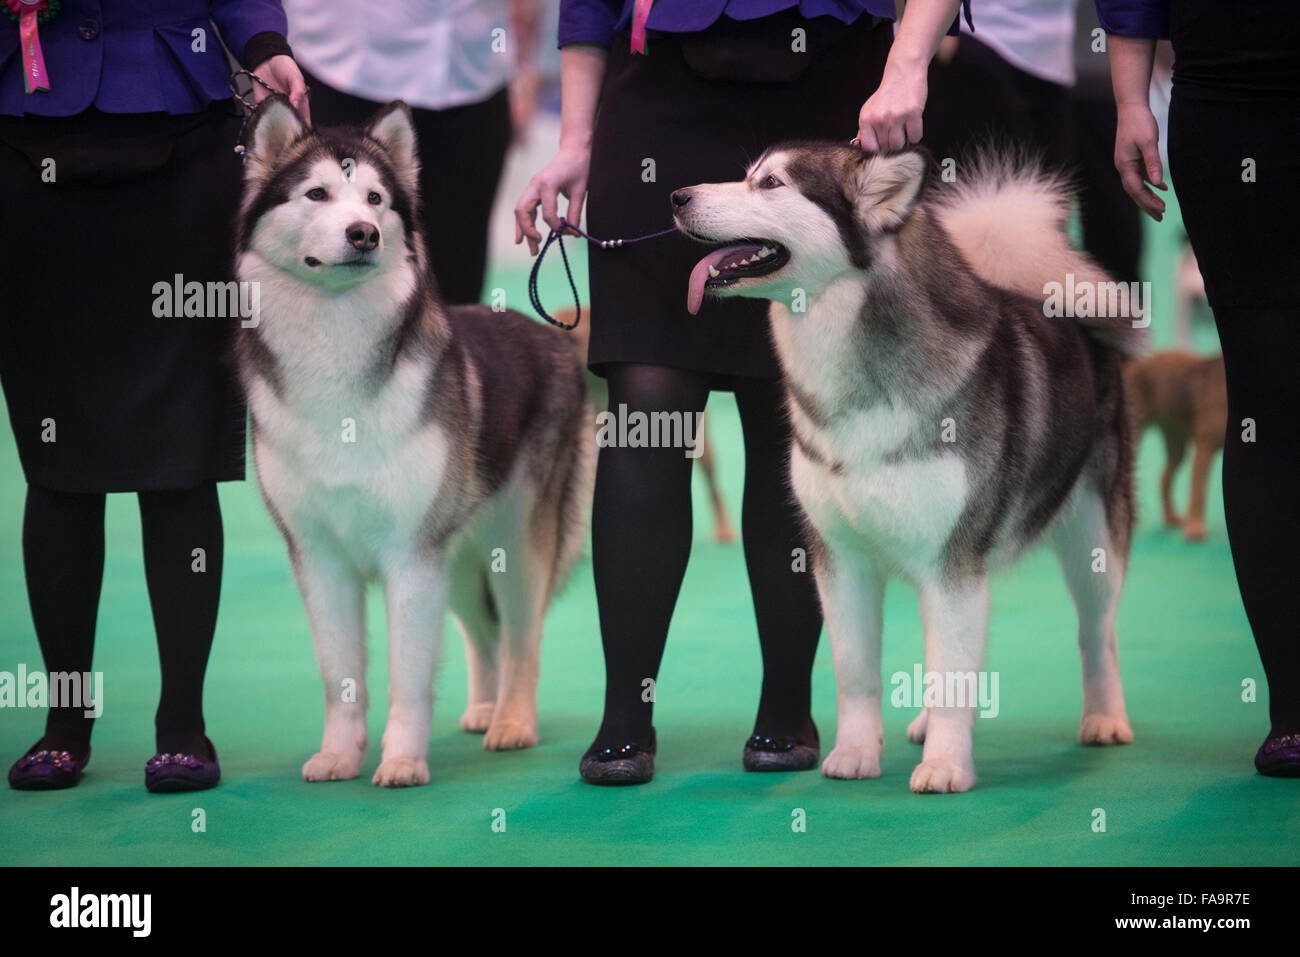 Crufts dog show at the NEC, Birmingham - Siberian Husky dogs showing in the Breeders Cup section UK 2015 Stock Photo